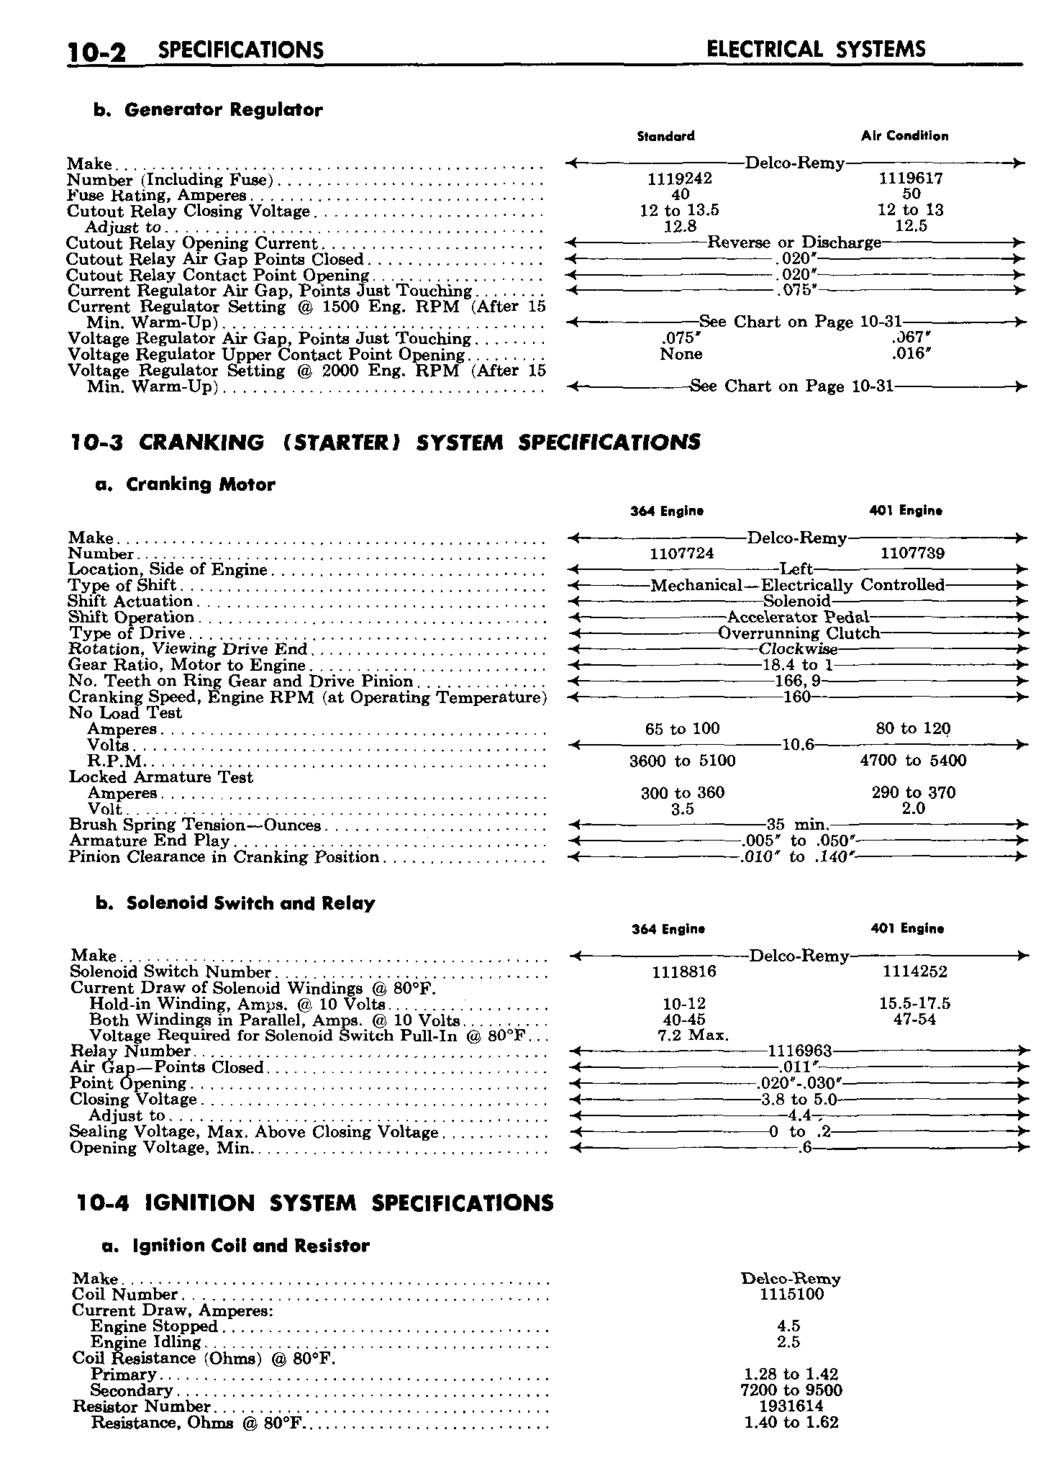 n_11 1959 Buick Shop Manual - Electrical Systems-002-002.jpg